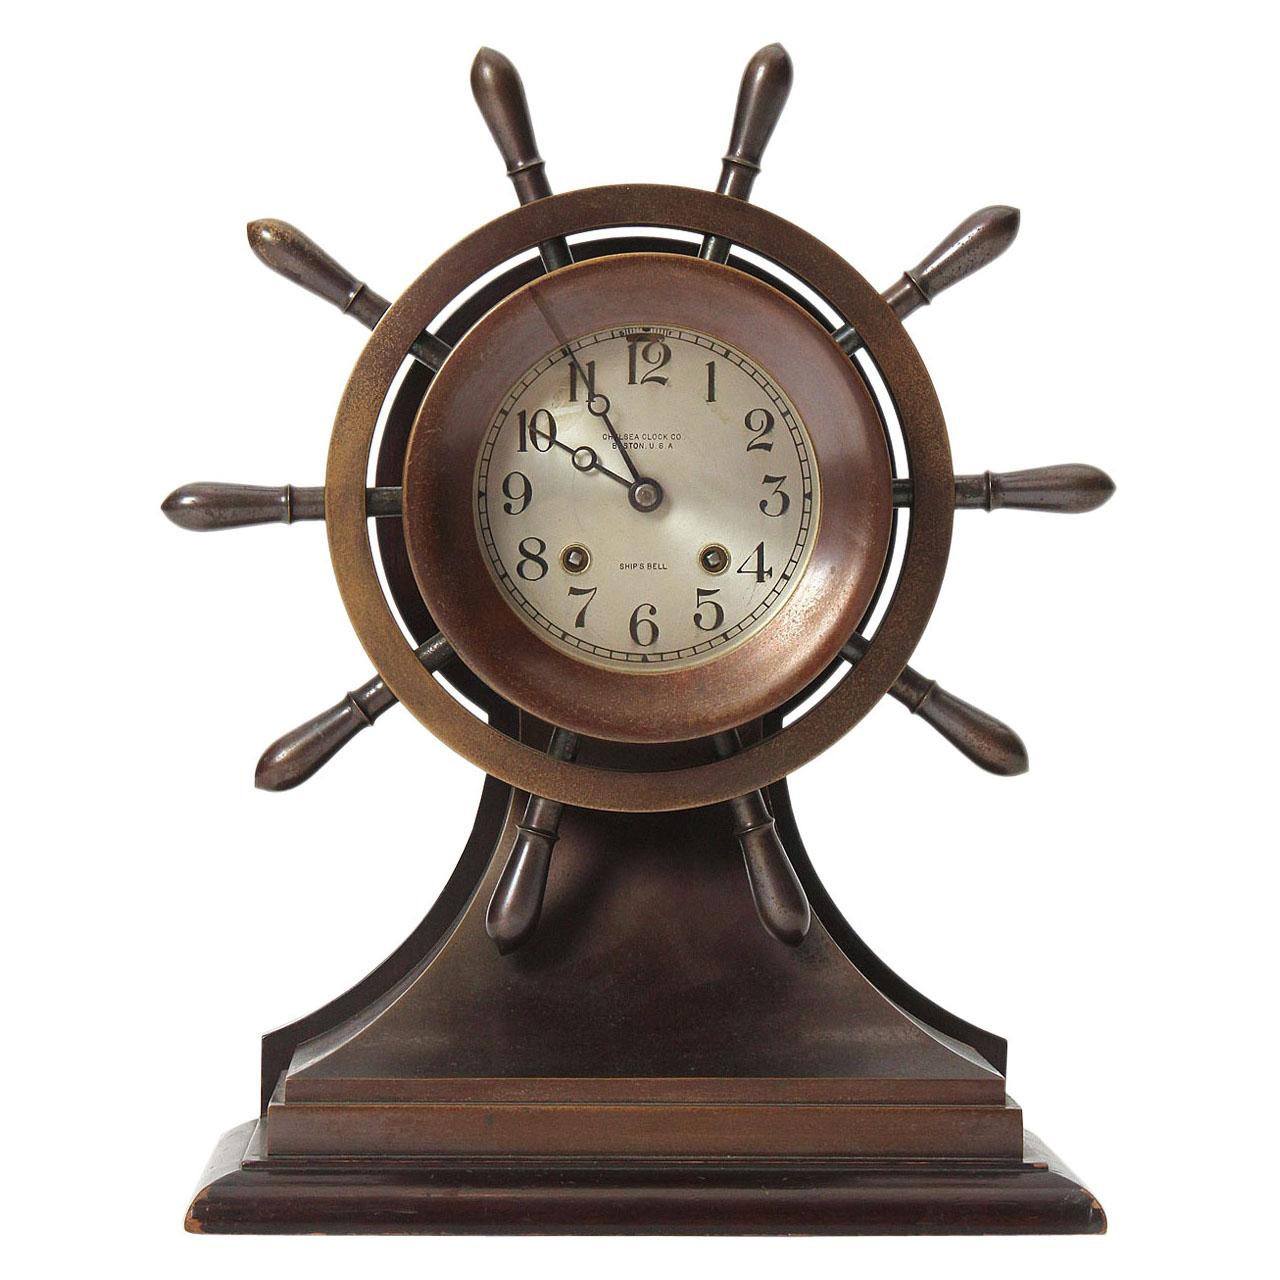 1930s Nautical Clock by Chelsea Clock Company for Bigelow Kennard & Co.